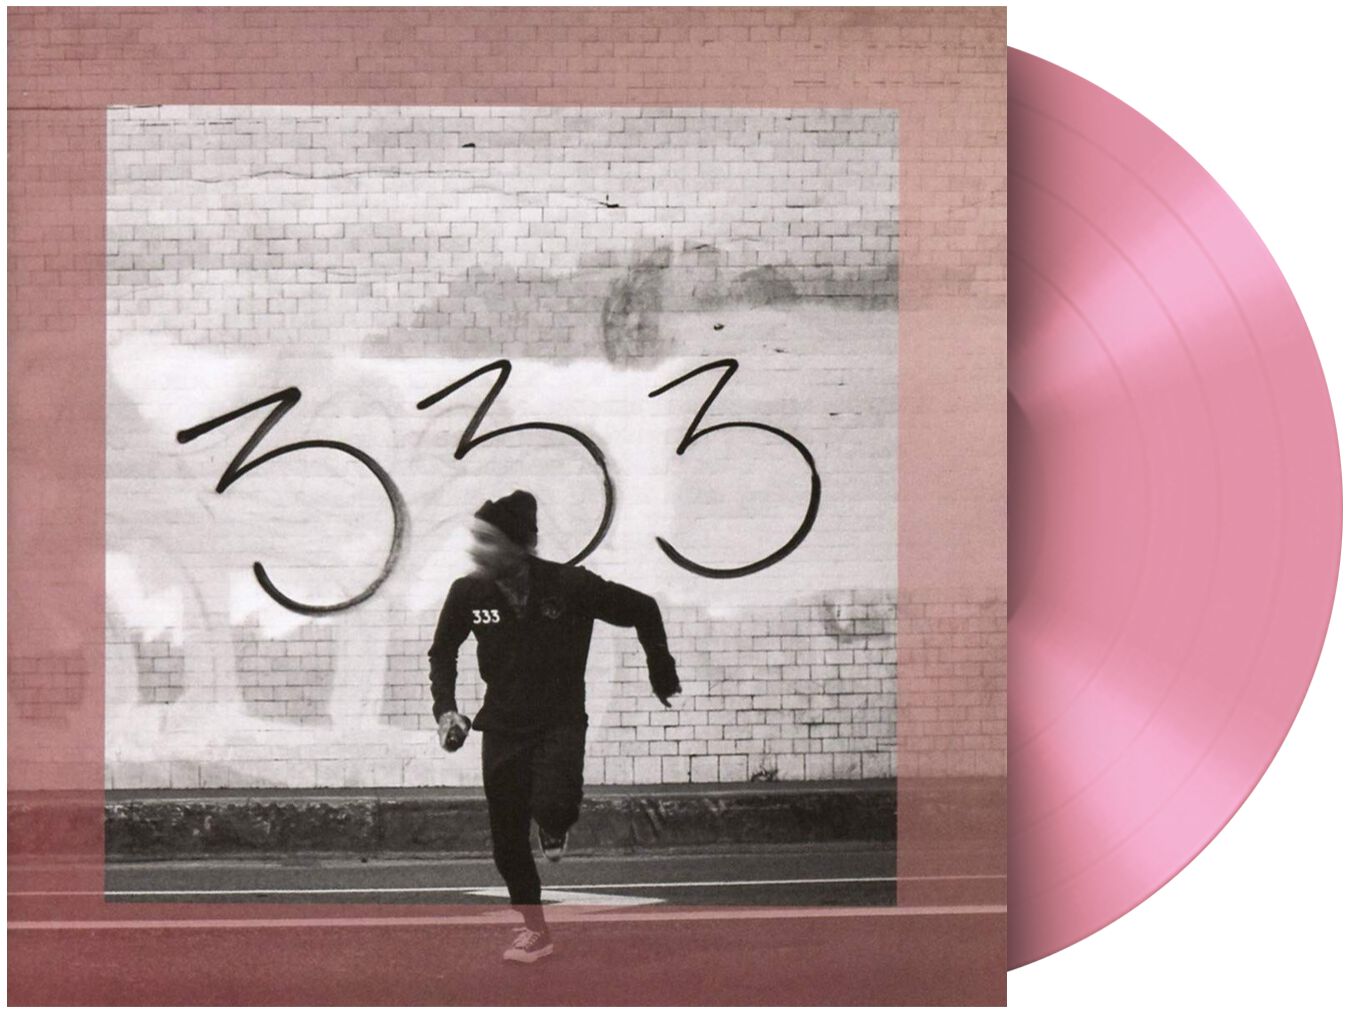 Image of Fever 333 Strength in numb333rs LP pink